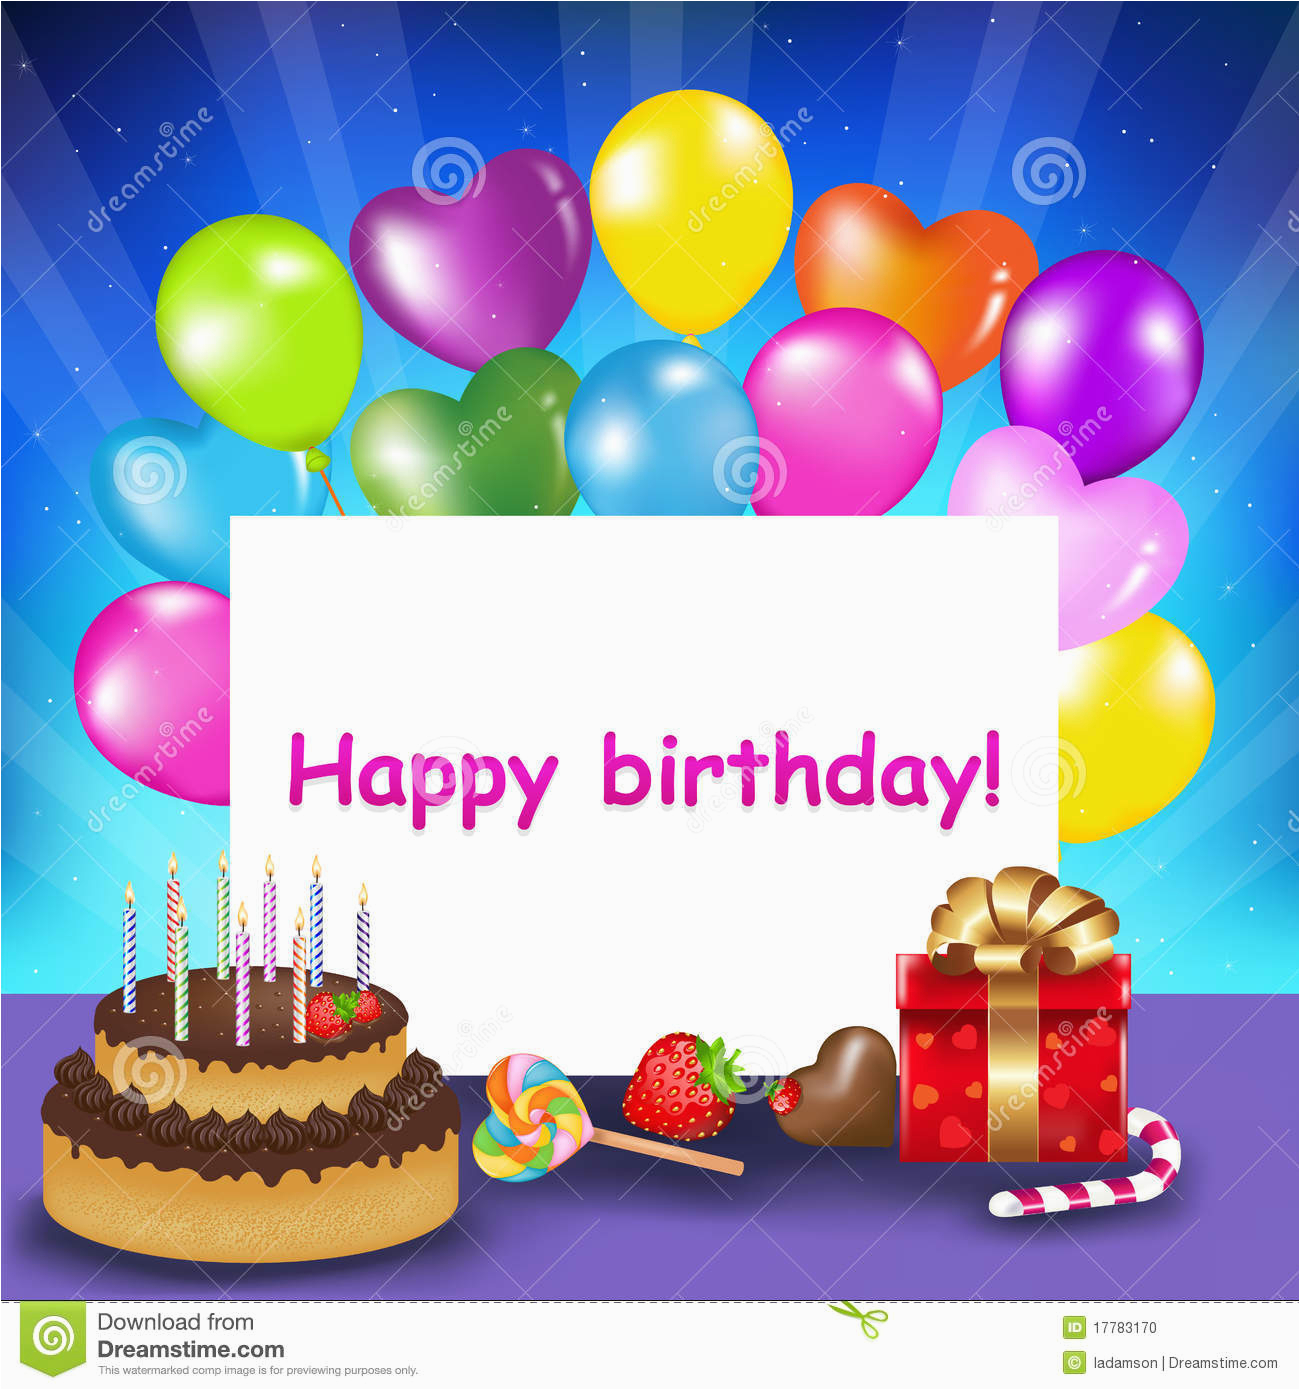 How to Post Birthday Cards On Facebook How to Post Birthday Cards On Facebook Card Design Ideas